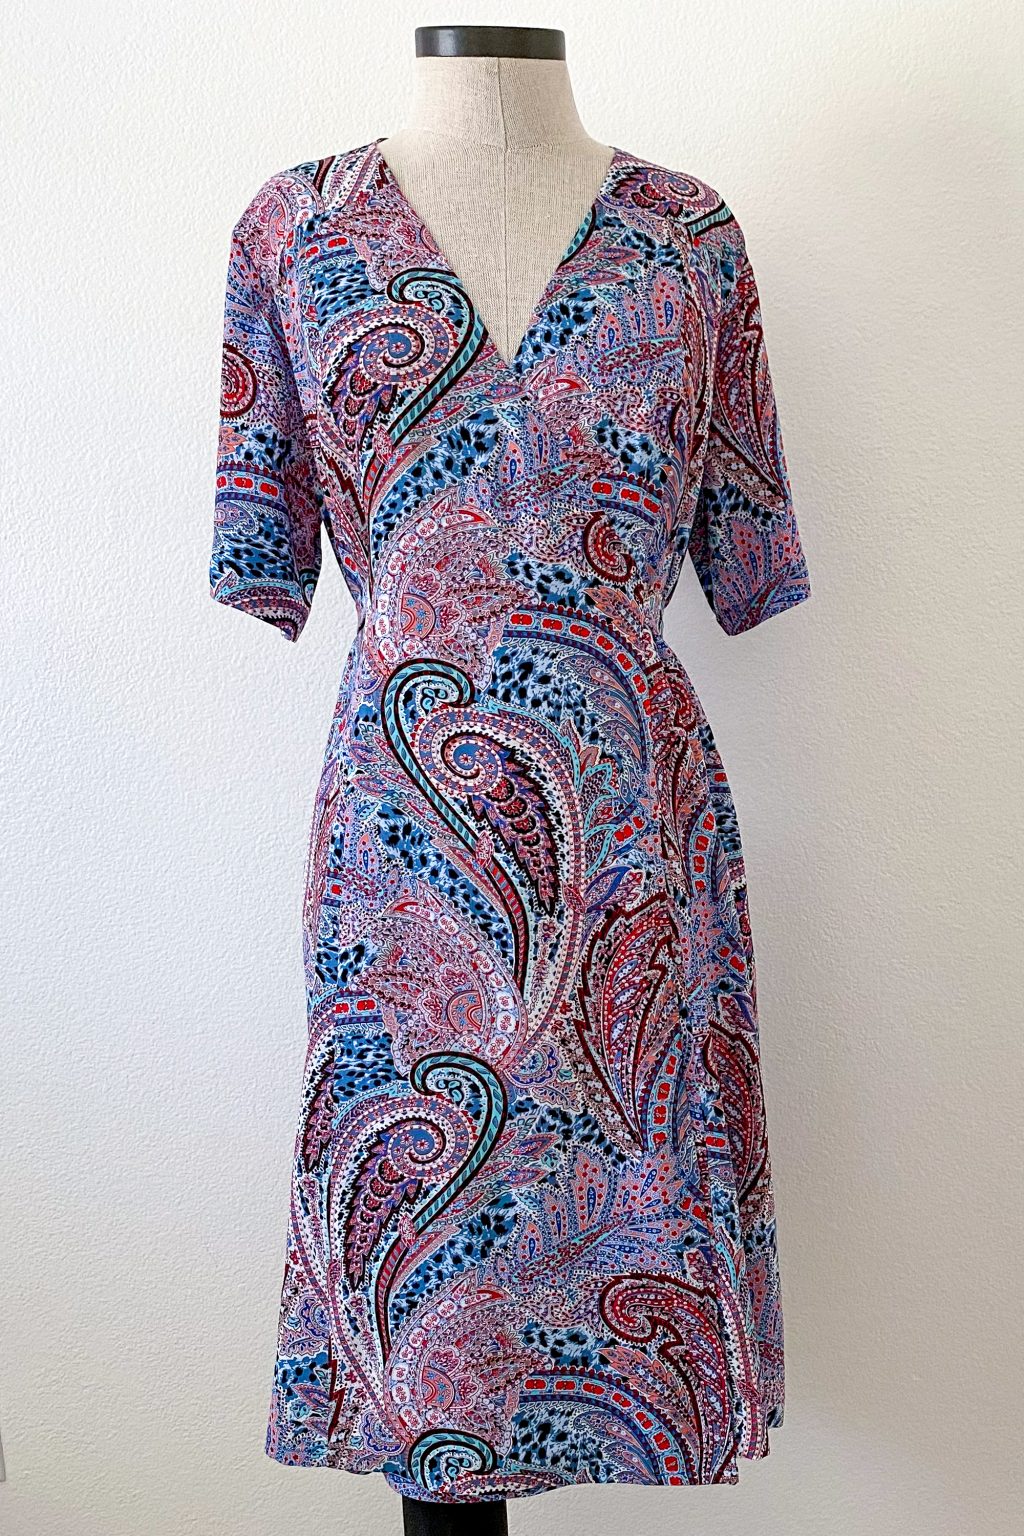 Blue Dot Patterns Andrea Wrap Dress and Top - The Fold Line